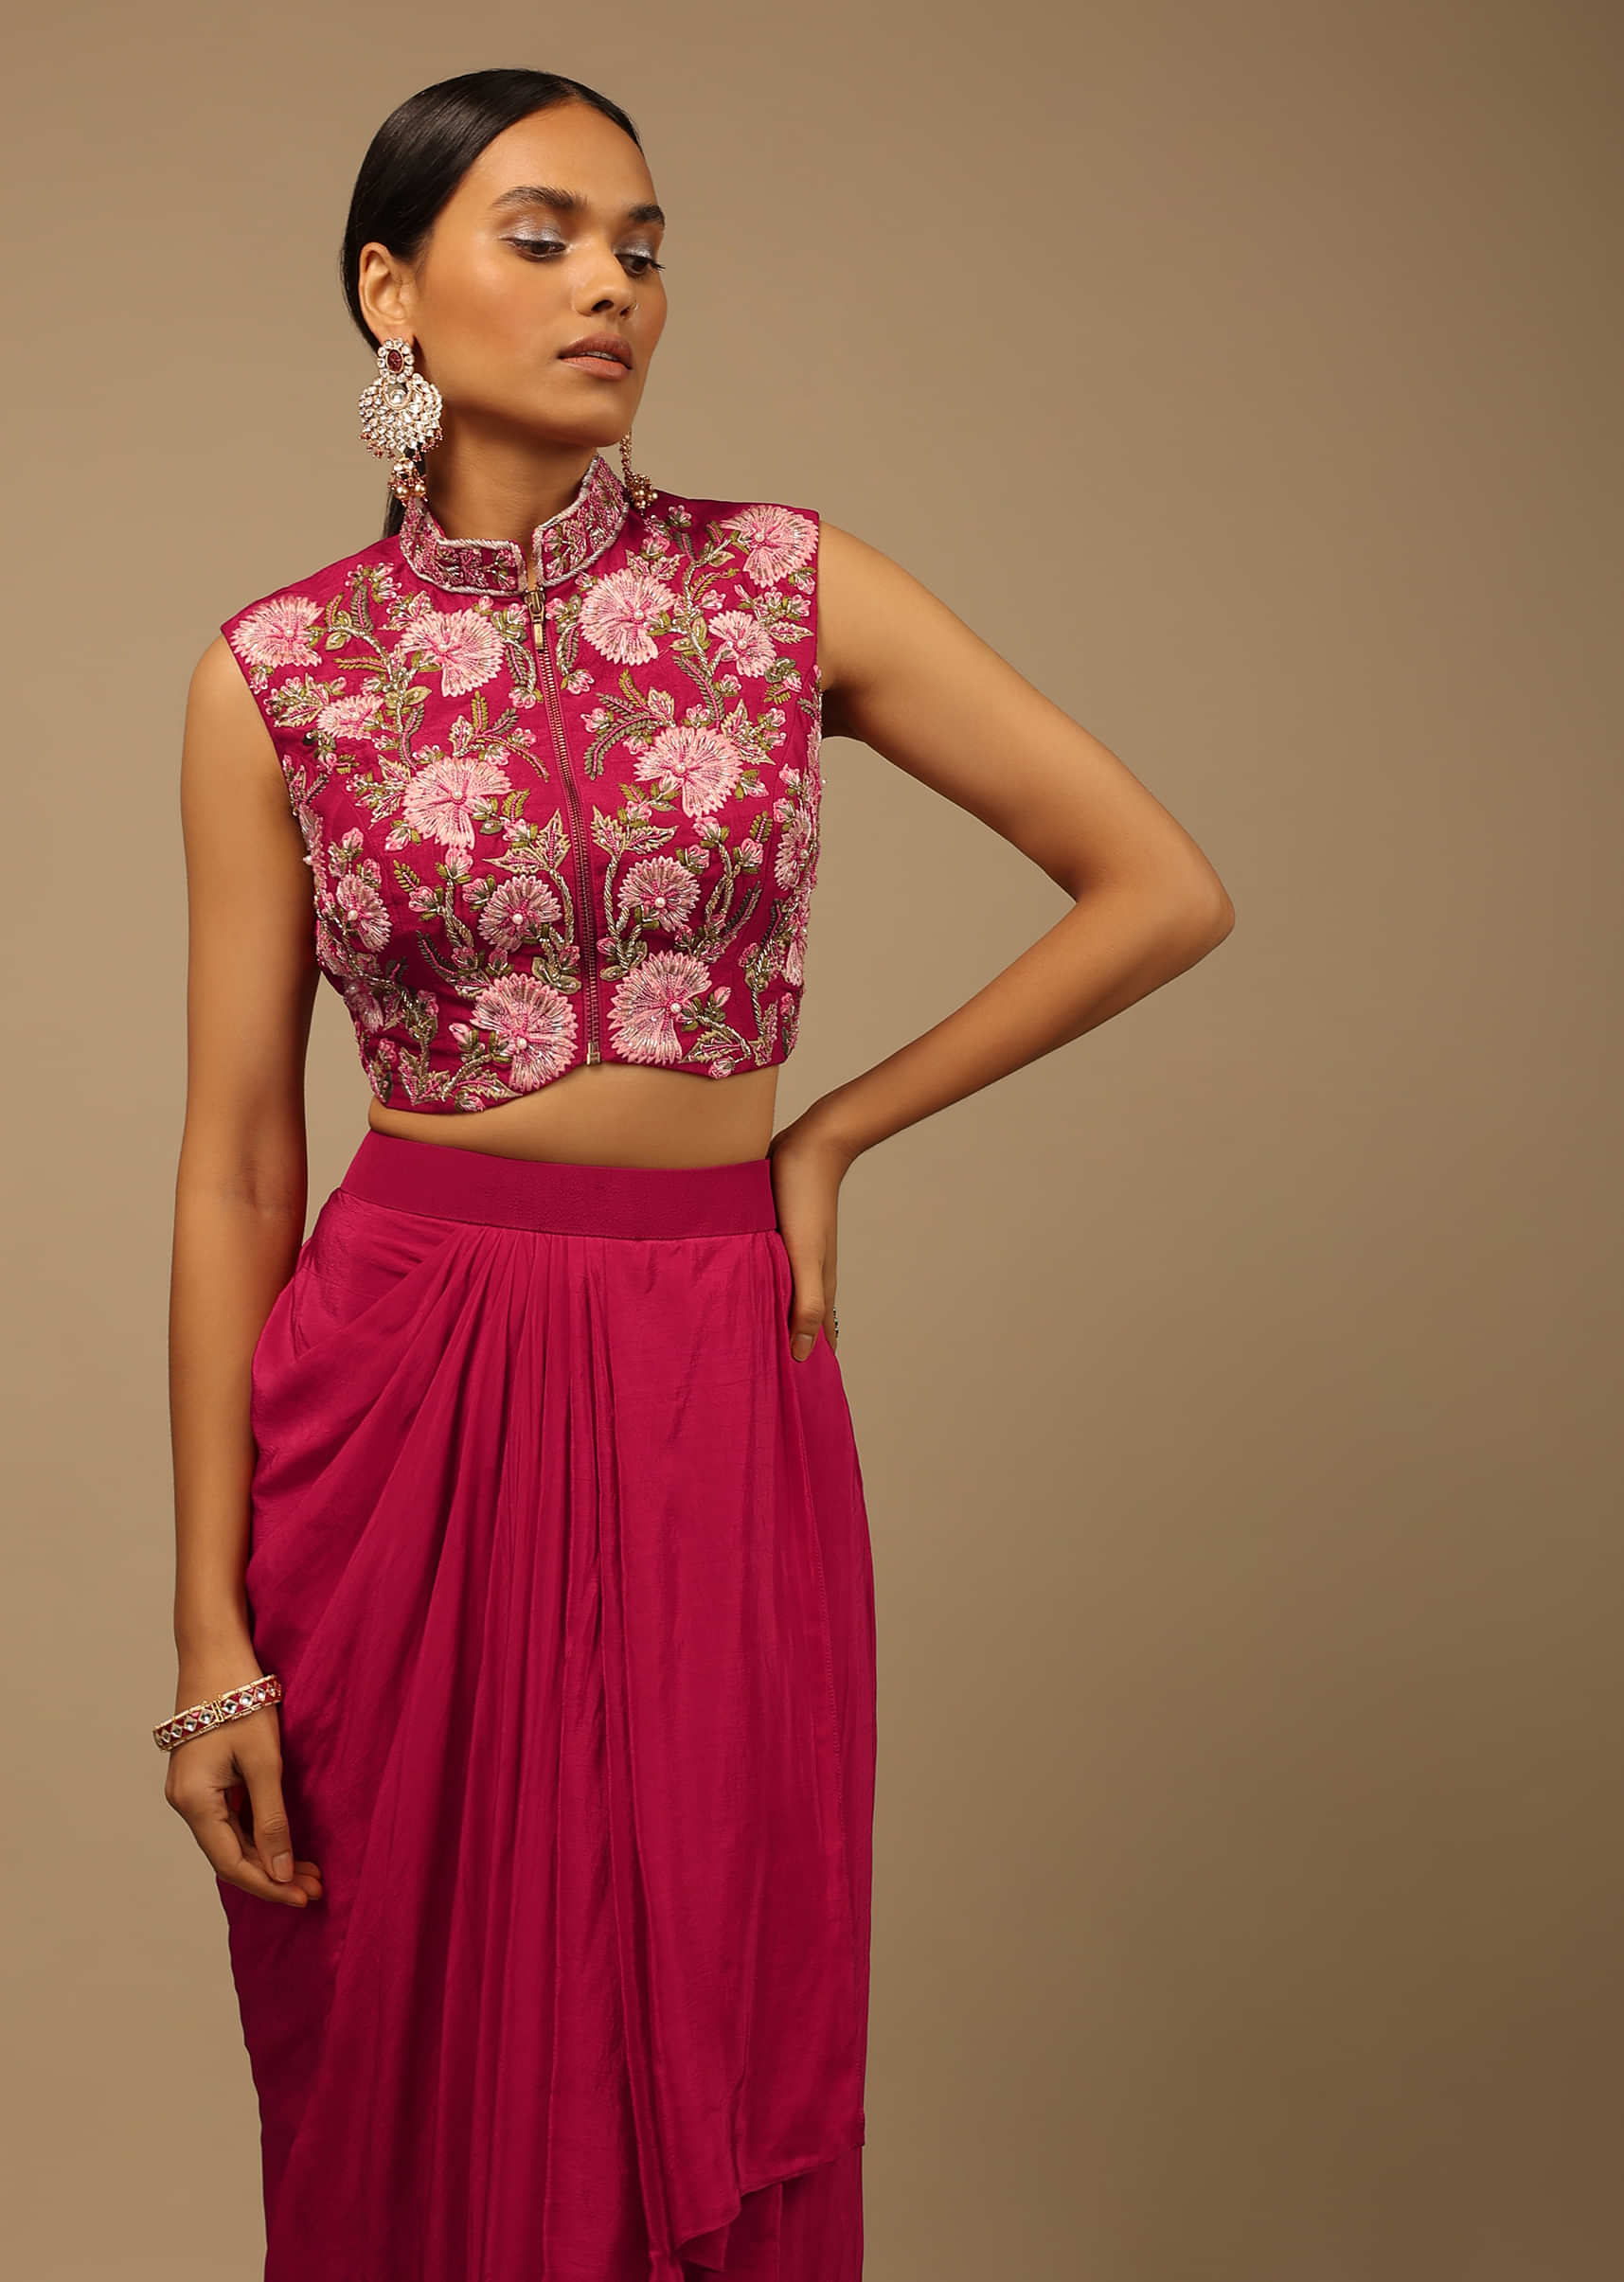 Hot Pink Draped Dhoti Skirt And Crop Top With Multi Colored Resham Flowers And Moti Highlights